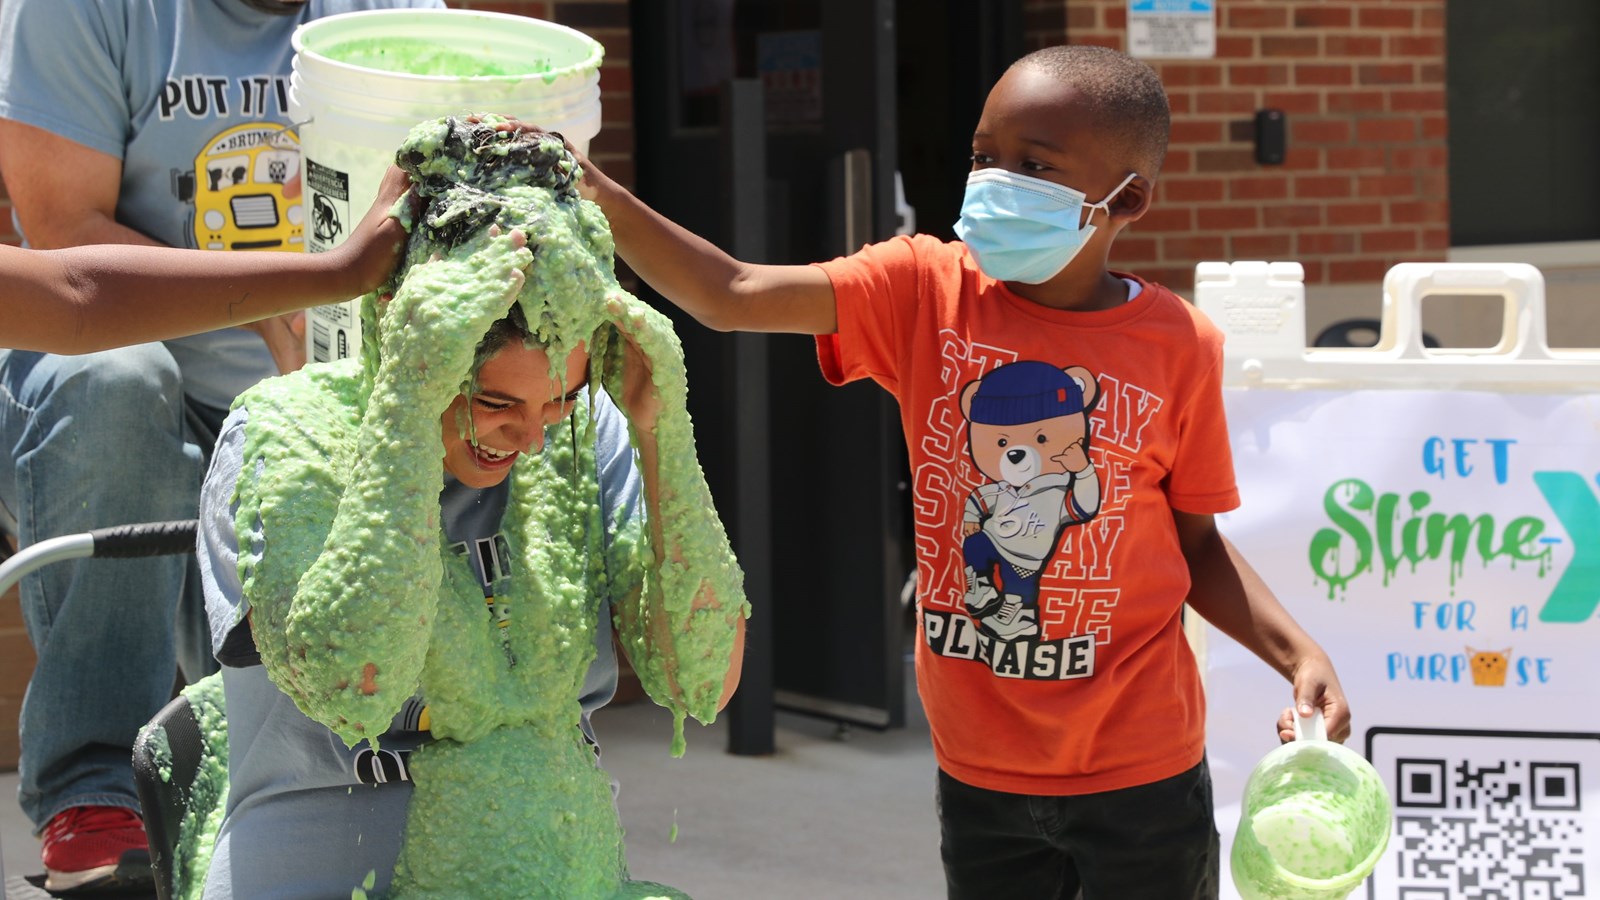 Brumby Teachers Gets Slimed for a Purpose